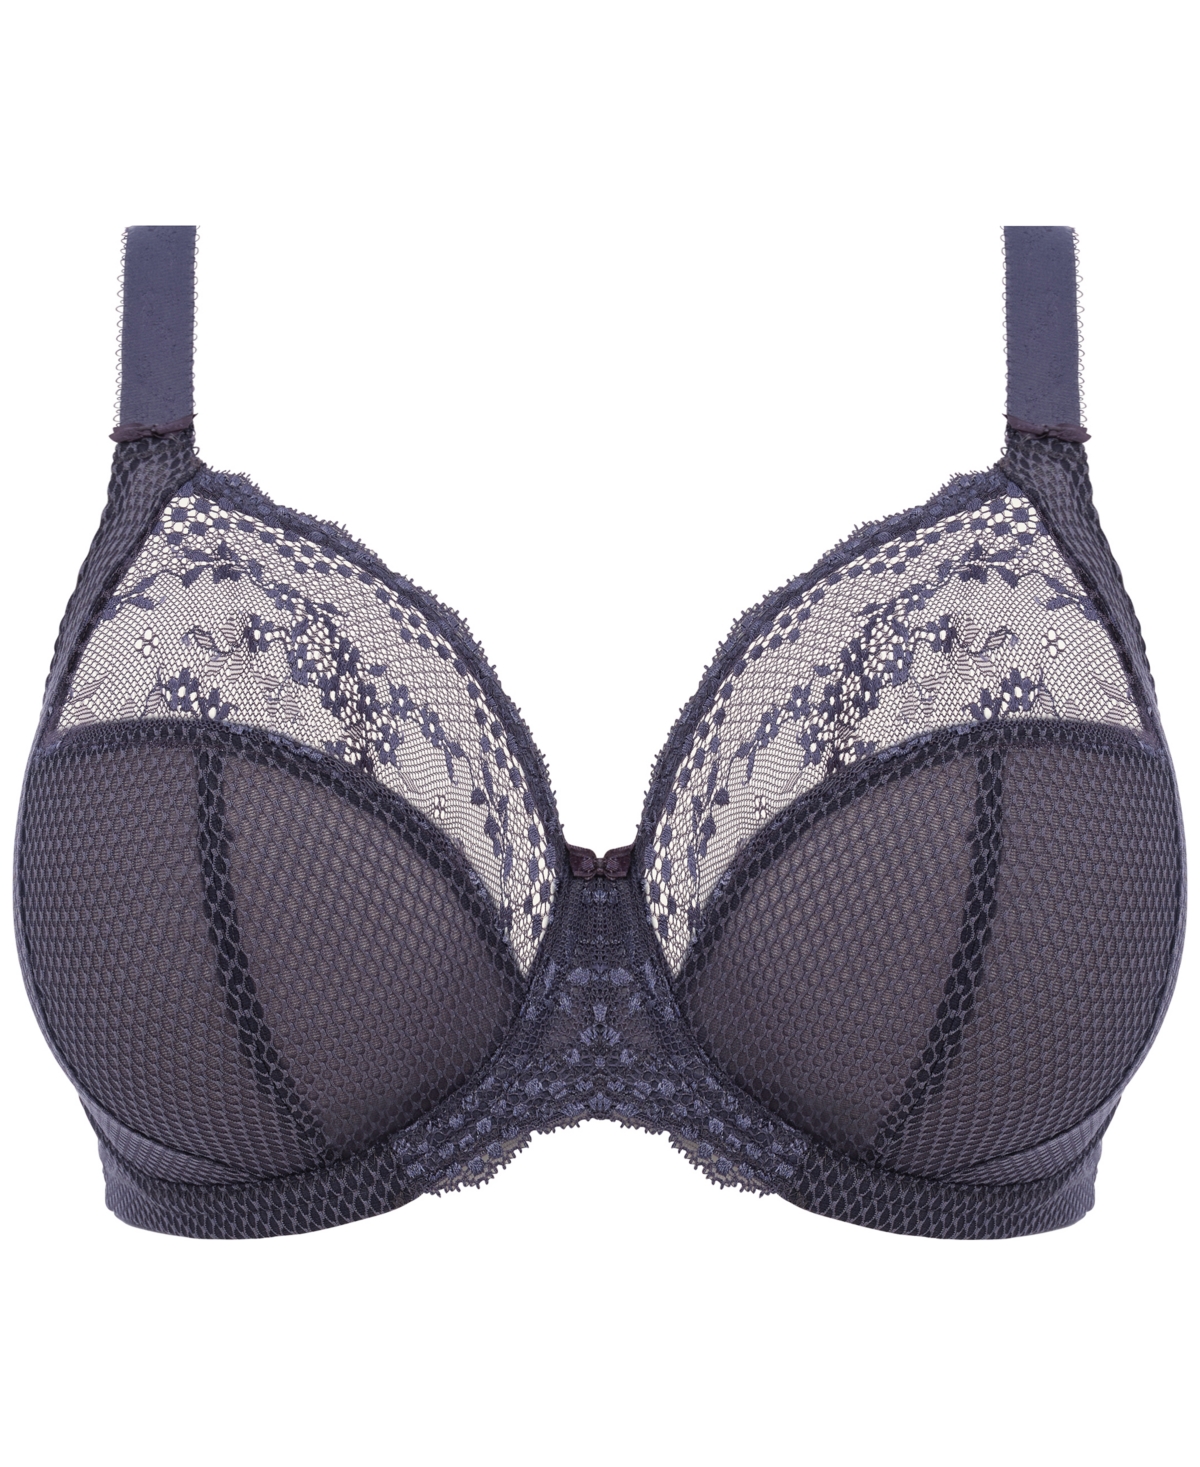 Elomi Full Figure Charley Stretch Lace Bra EL4382, Online Only